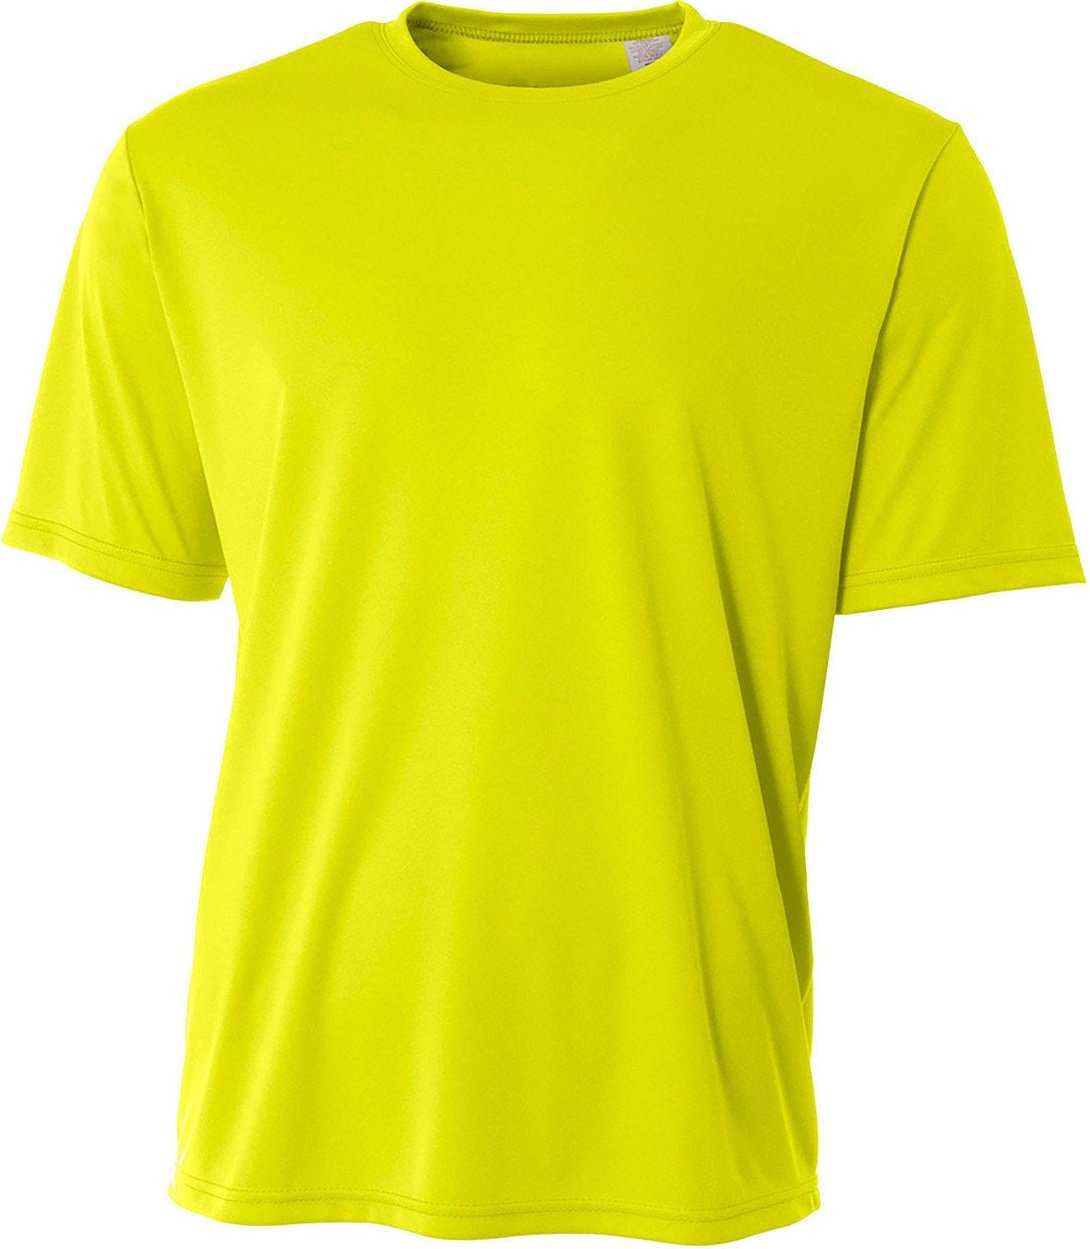 A4 NB3402 Sprint Short Sleeve Youth Tee - Safety Yellow